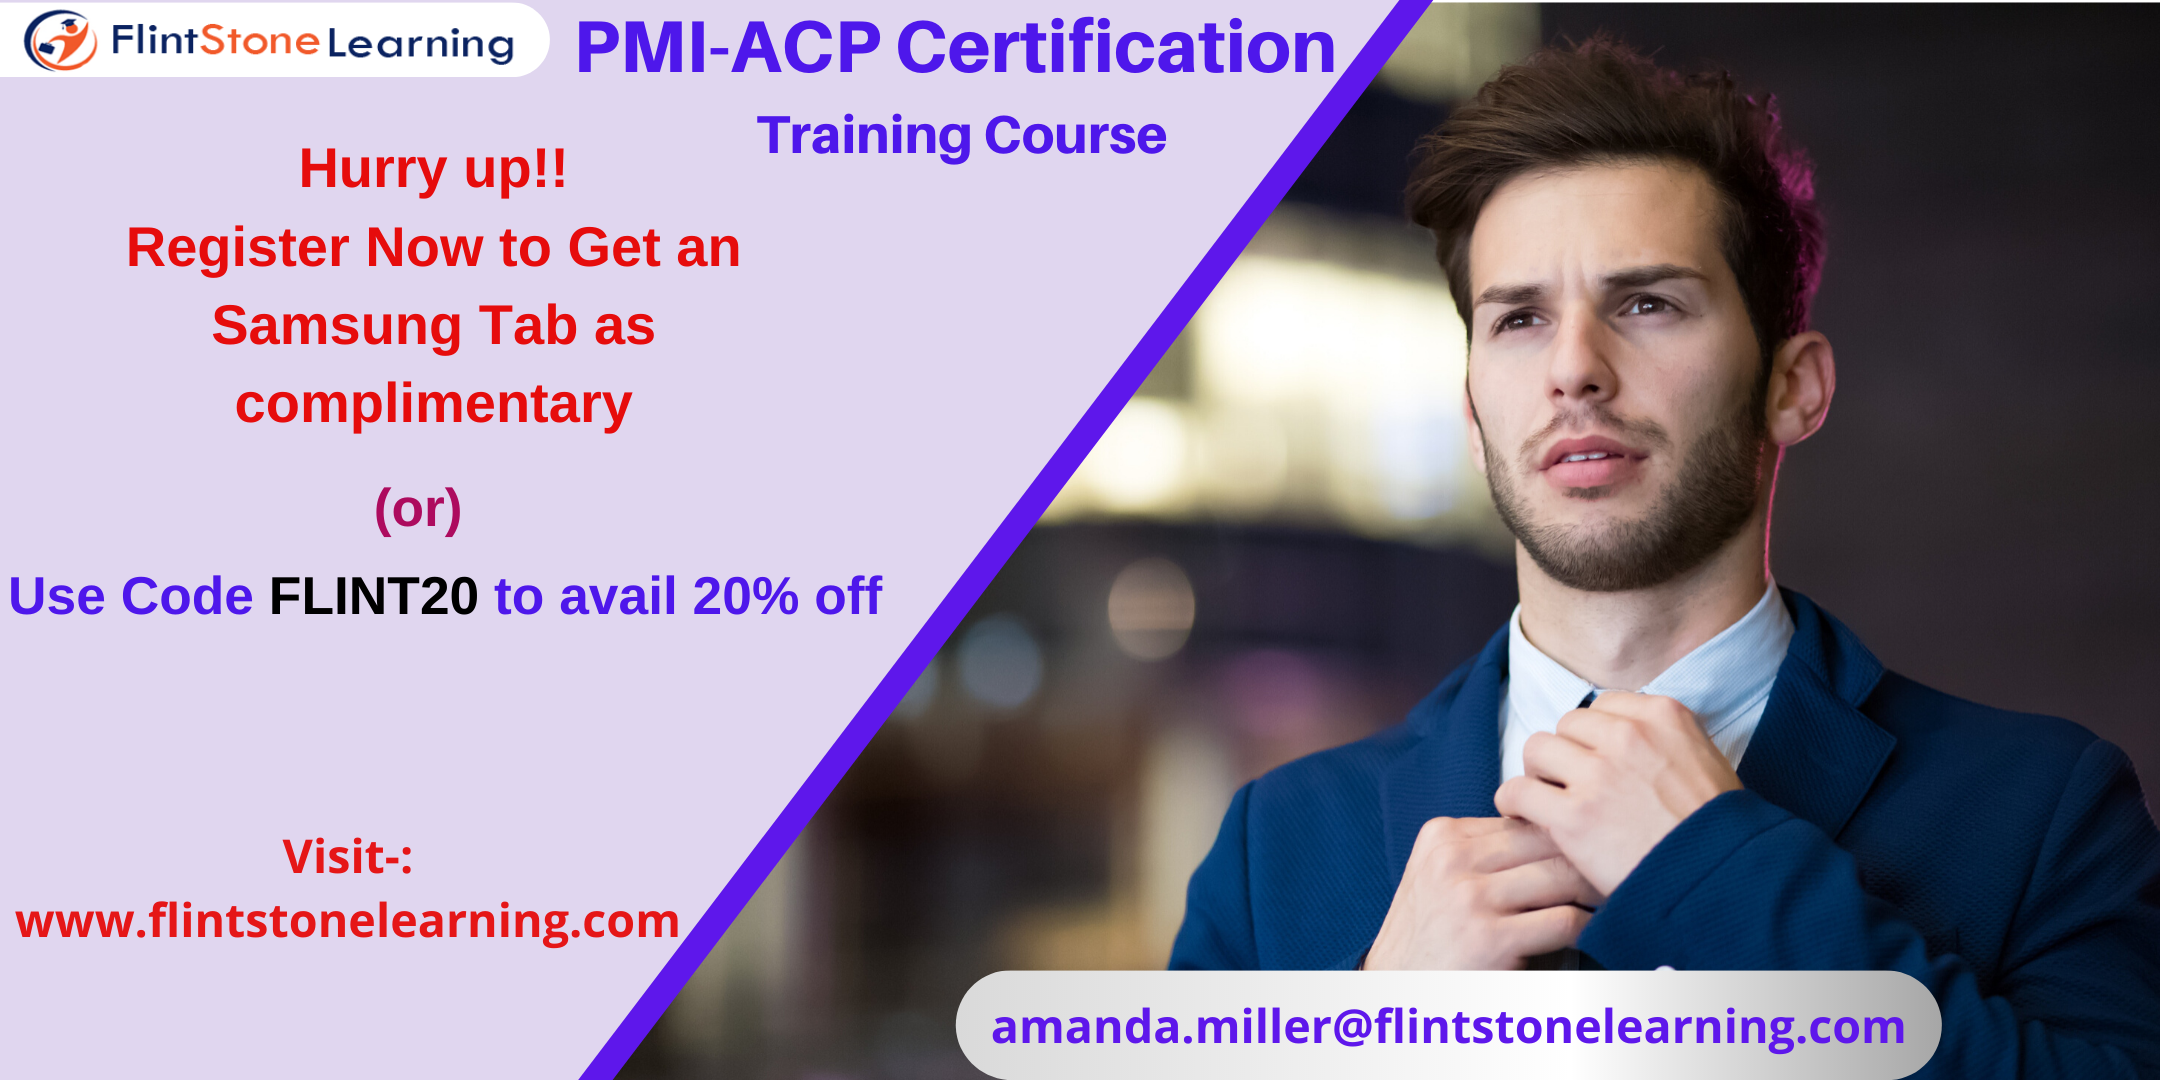 PMI-ACP Certification Training Course in Brentwood, CA